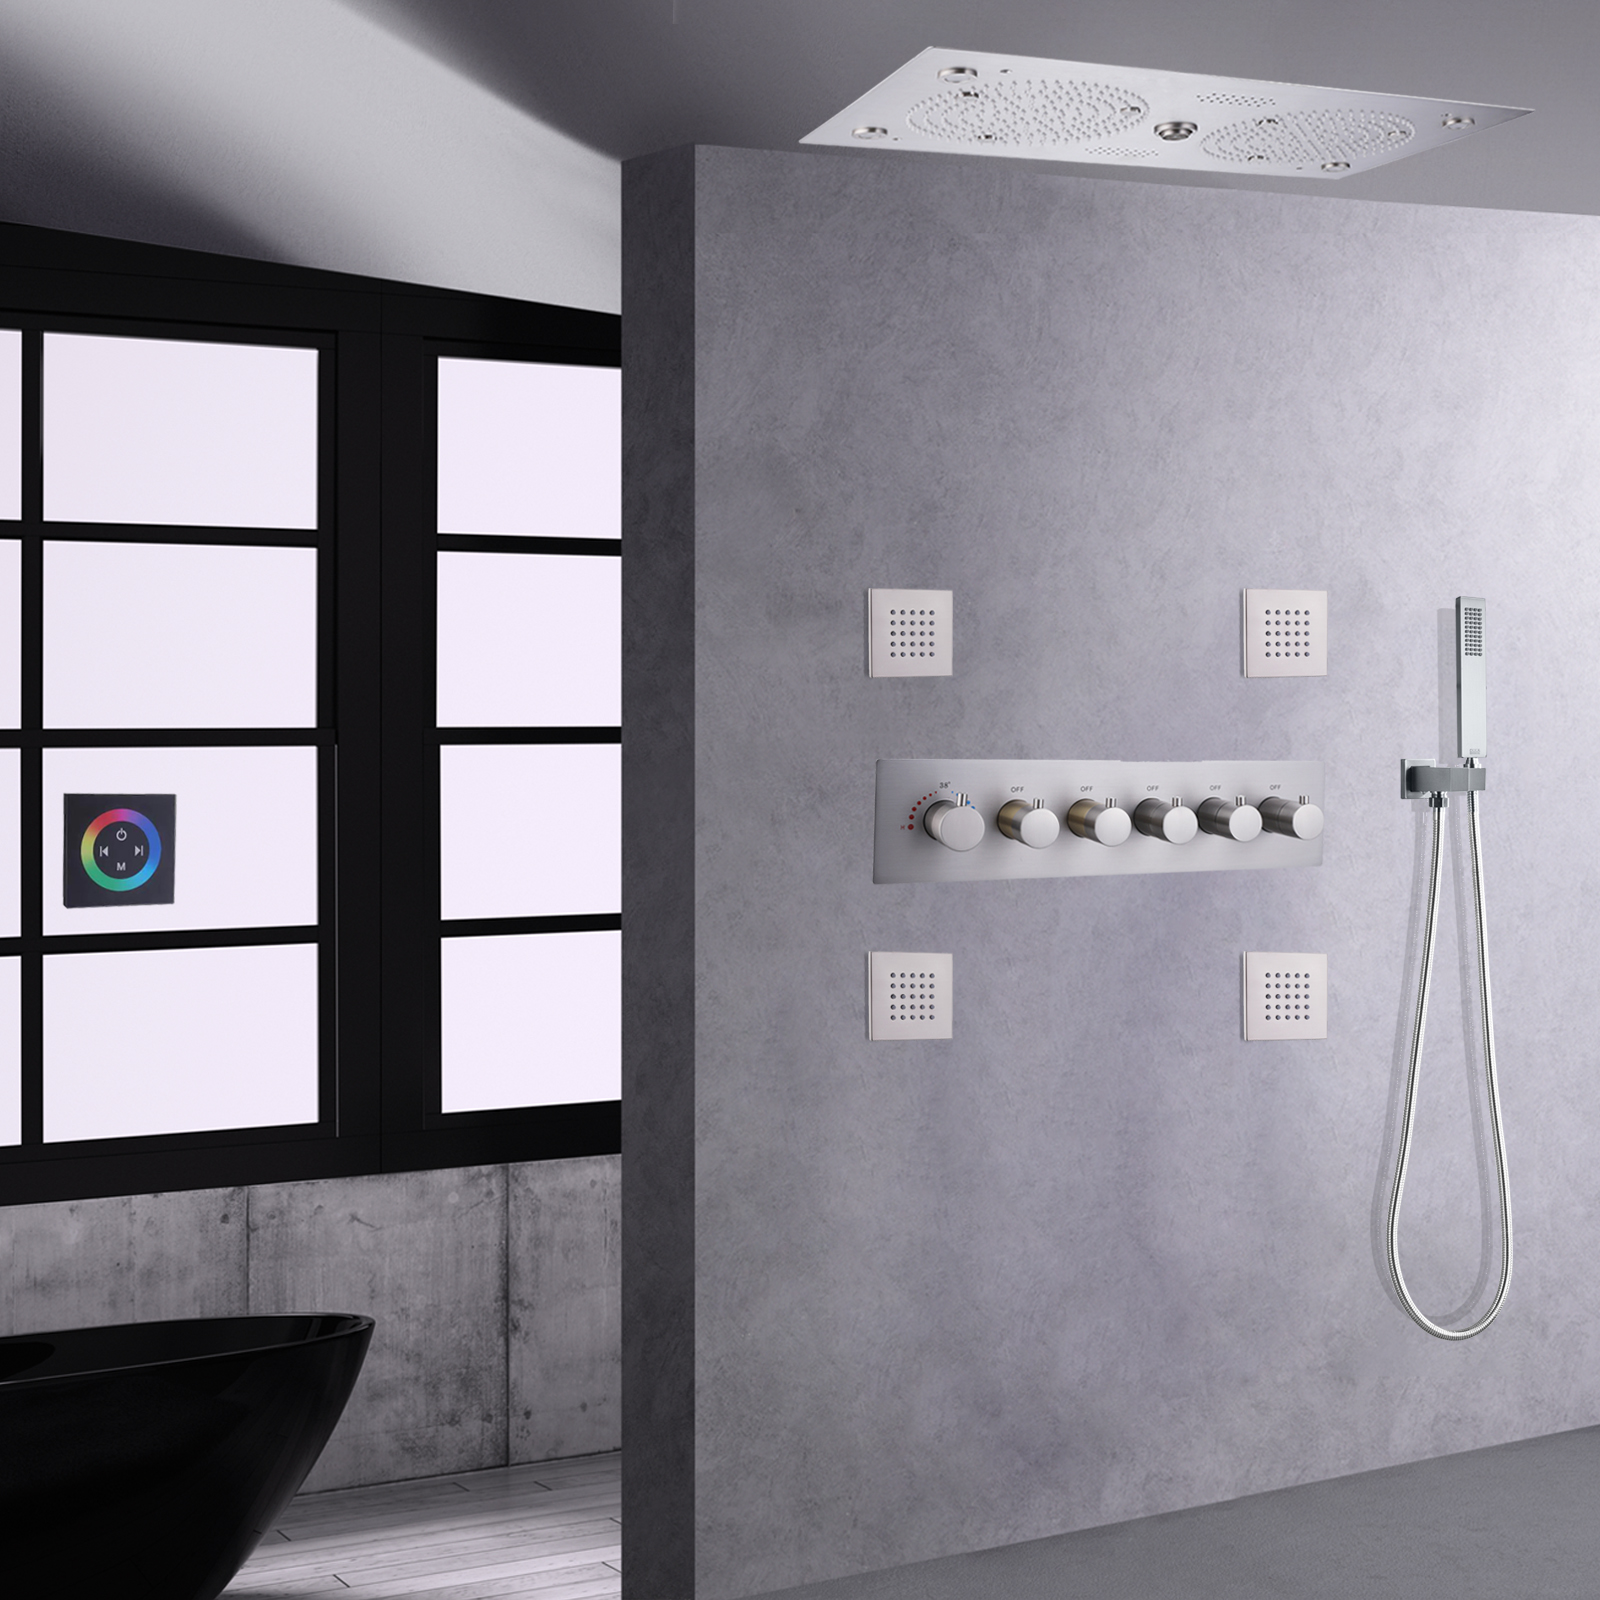 Brushed Nickel LED Wall Mounted Music Shower Thermostatic High Flow Rainfall Shower Faucet